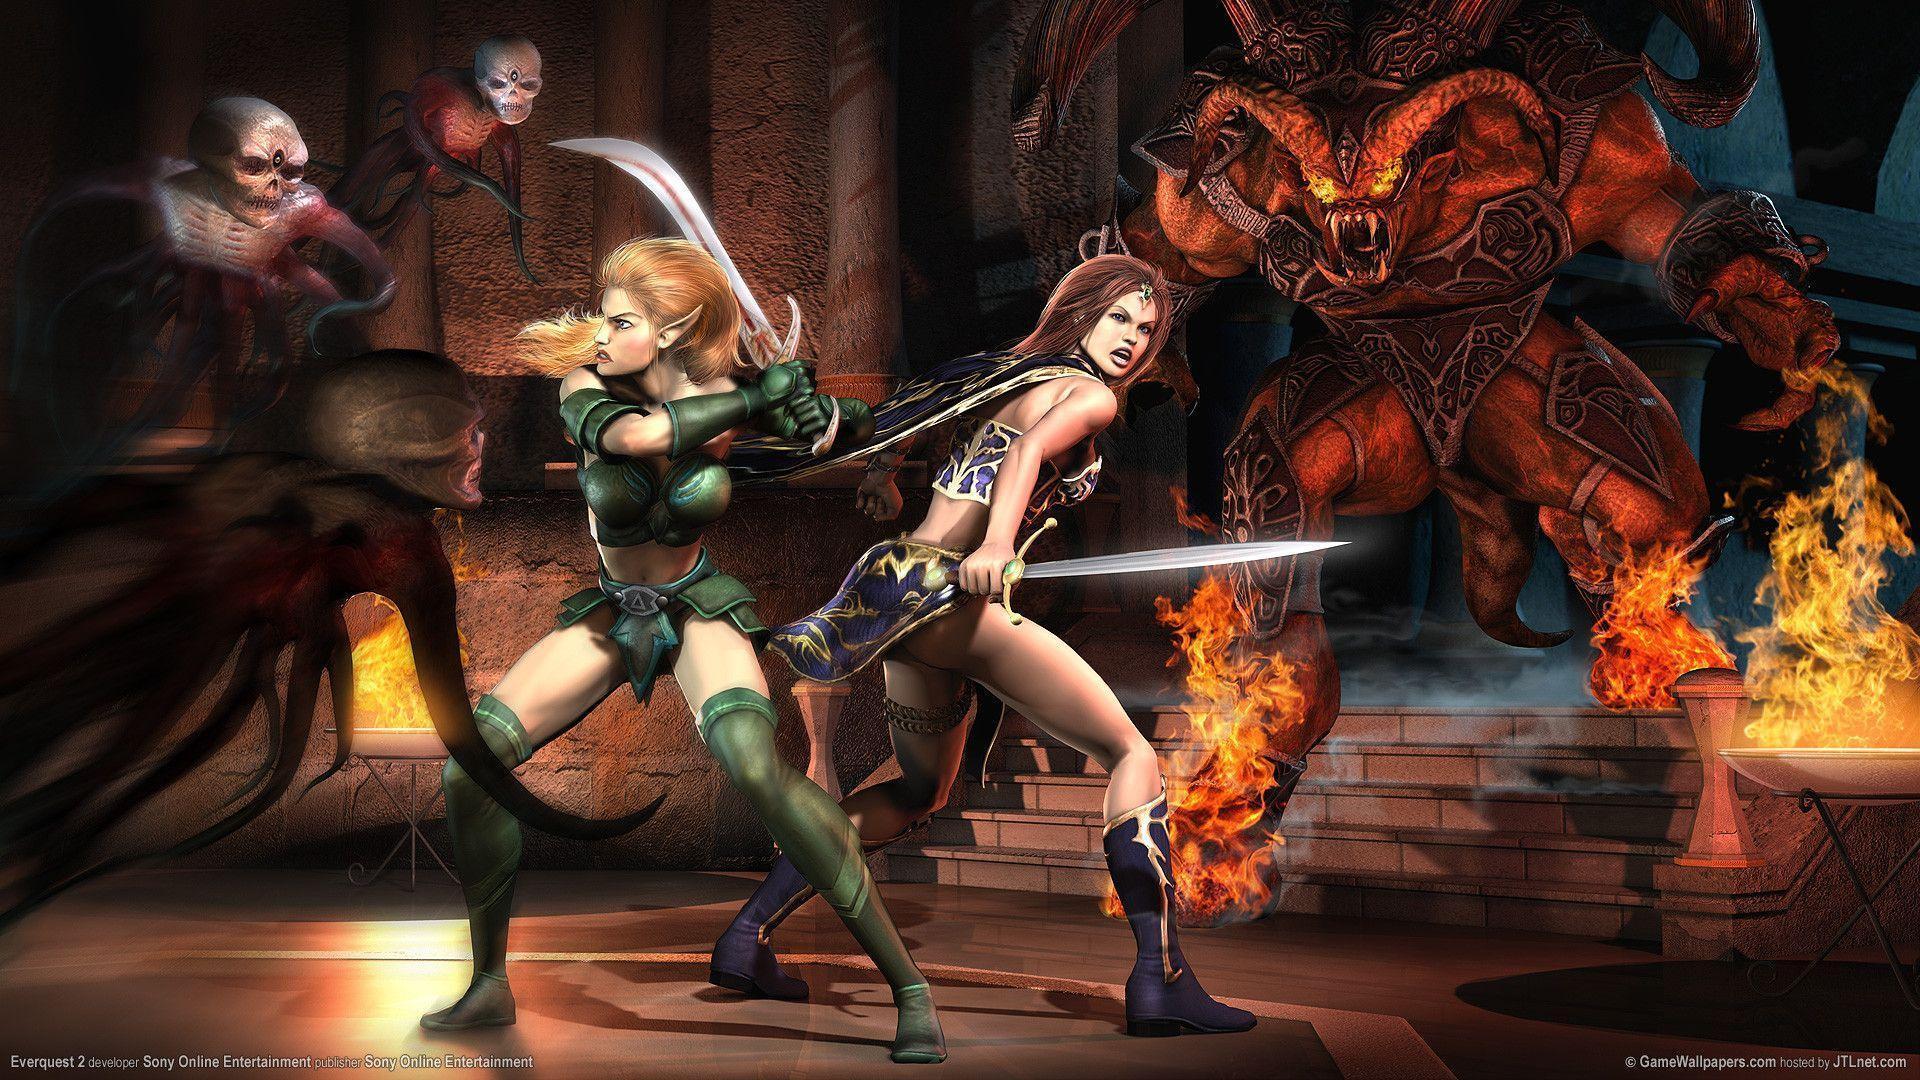 Everquest 2 Review Why You Should Play to Play MMO